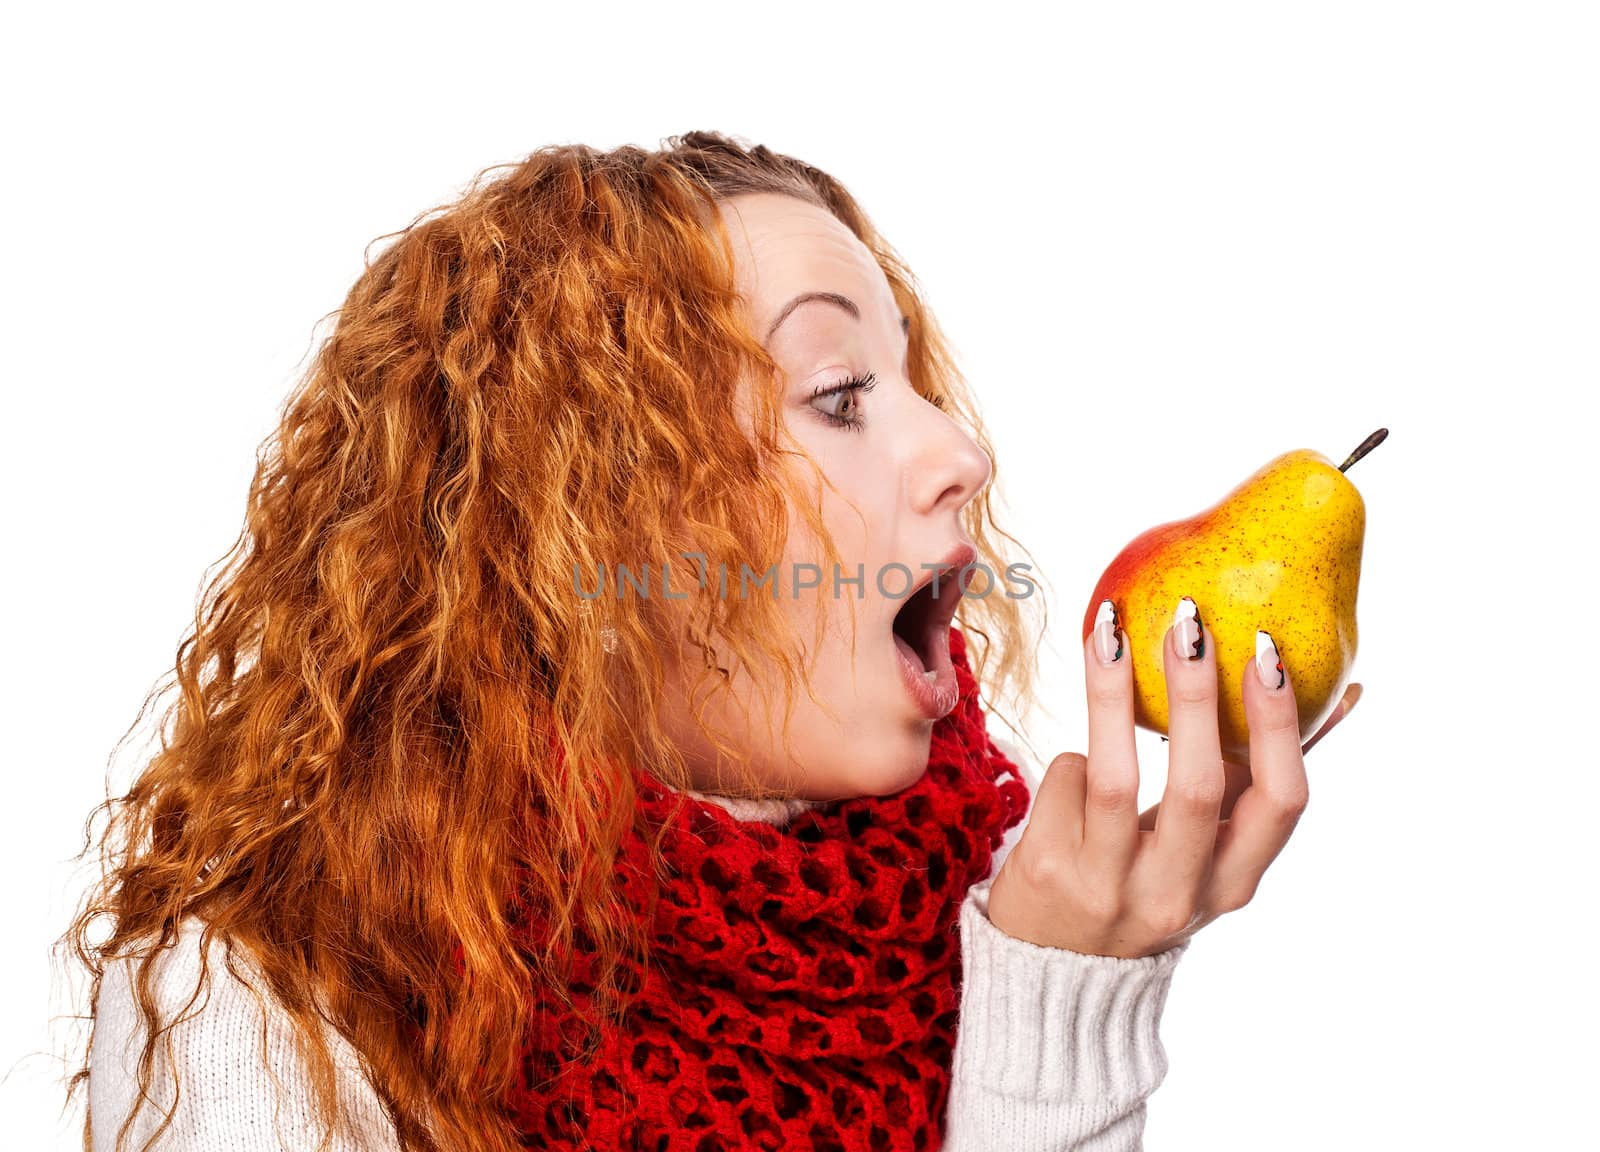 Redheaded girl wants to eat a pear by palinchak